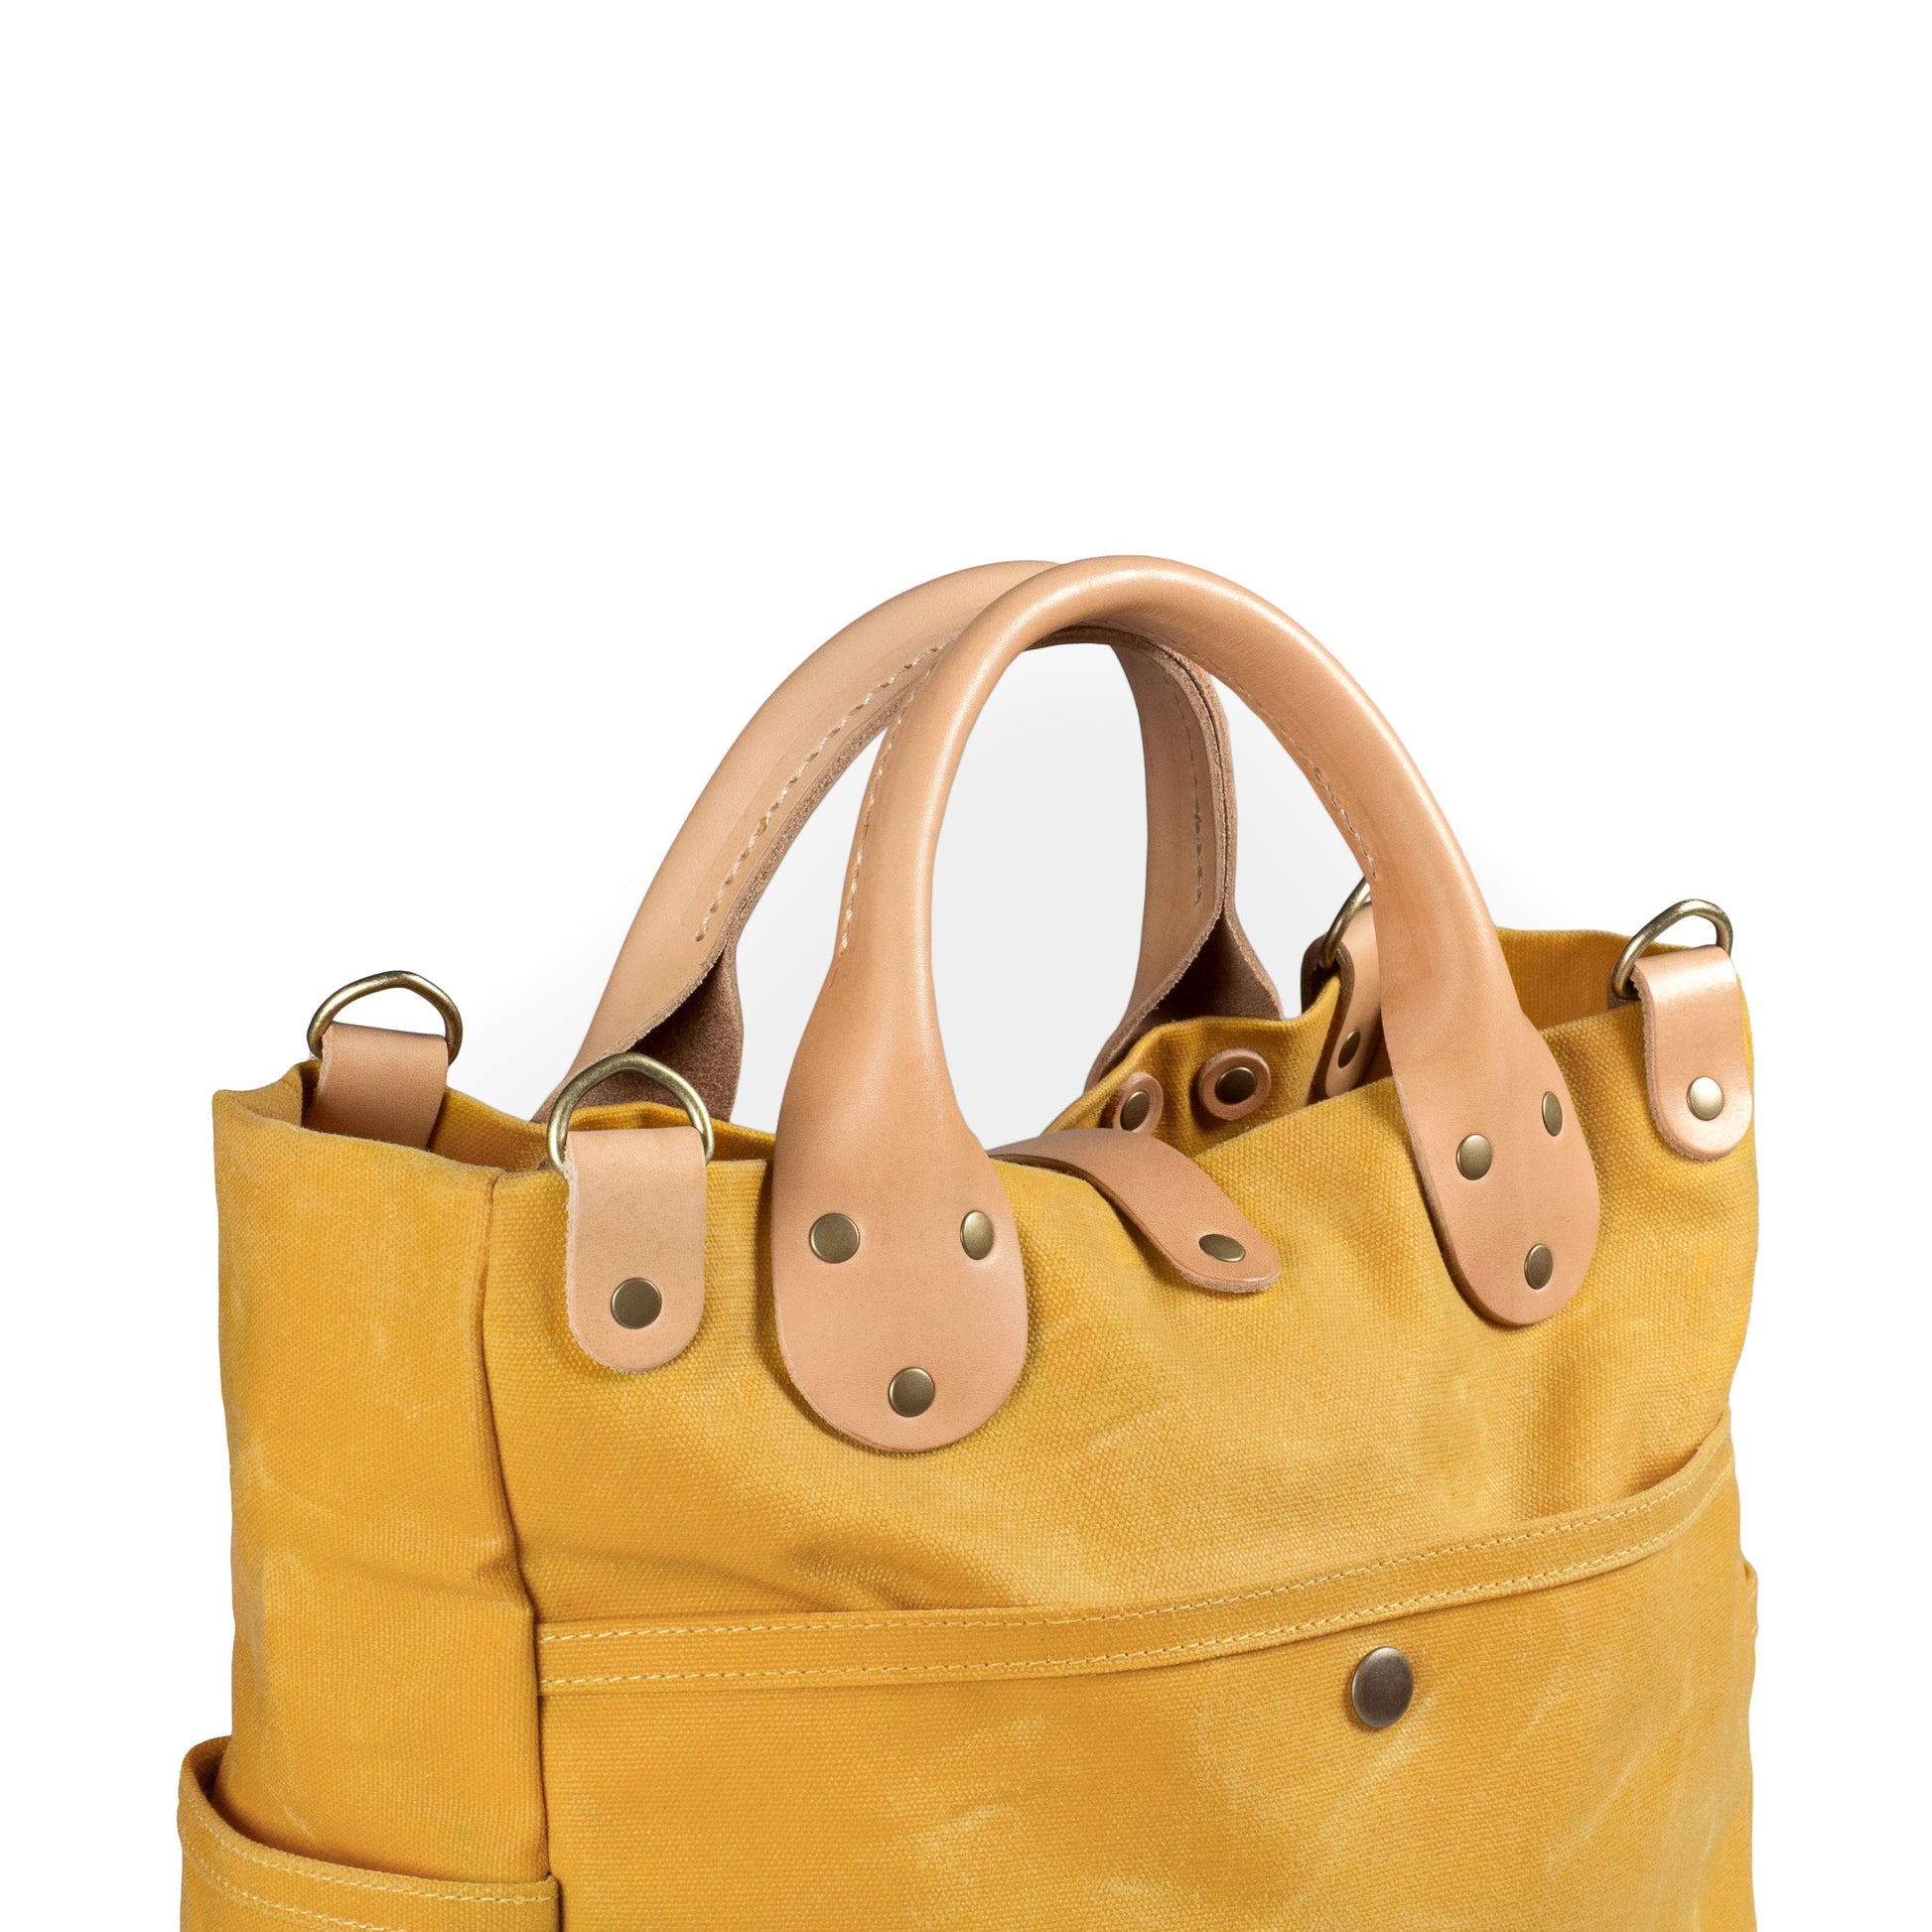 Carryall Yellow Waxed Canvas & Natural Leather